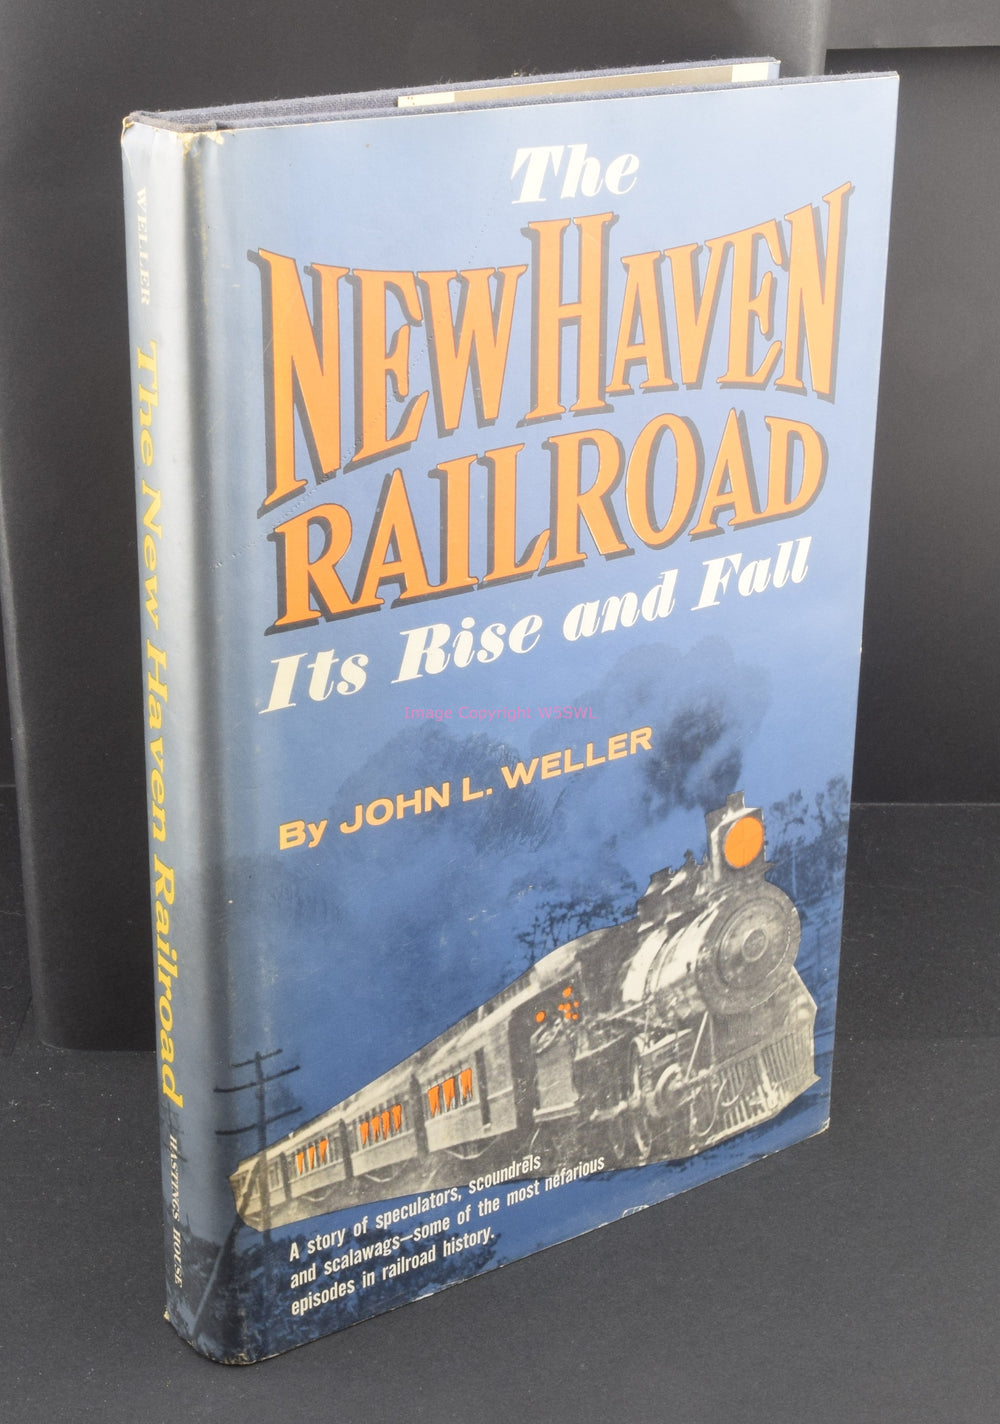 The New Haven Railroad - Its Rise and Fall by John Weller - Dave's Hobby Shop by W5SWL